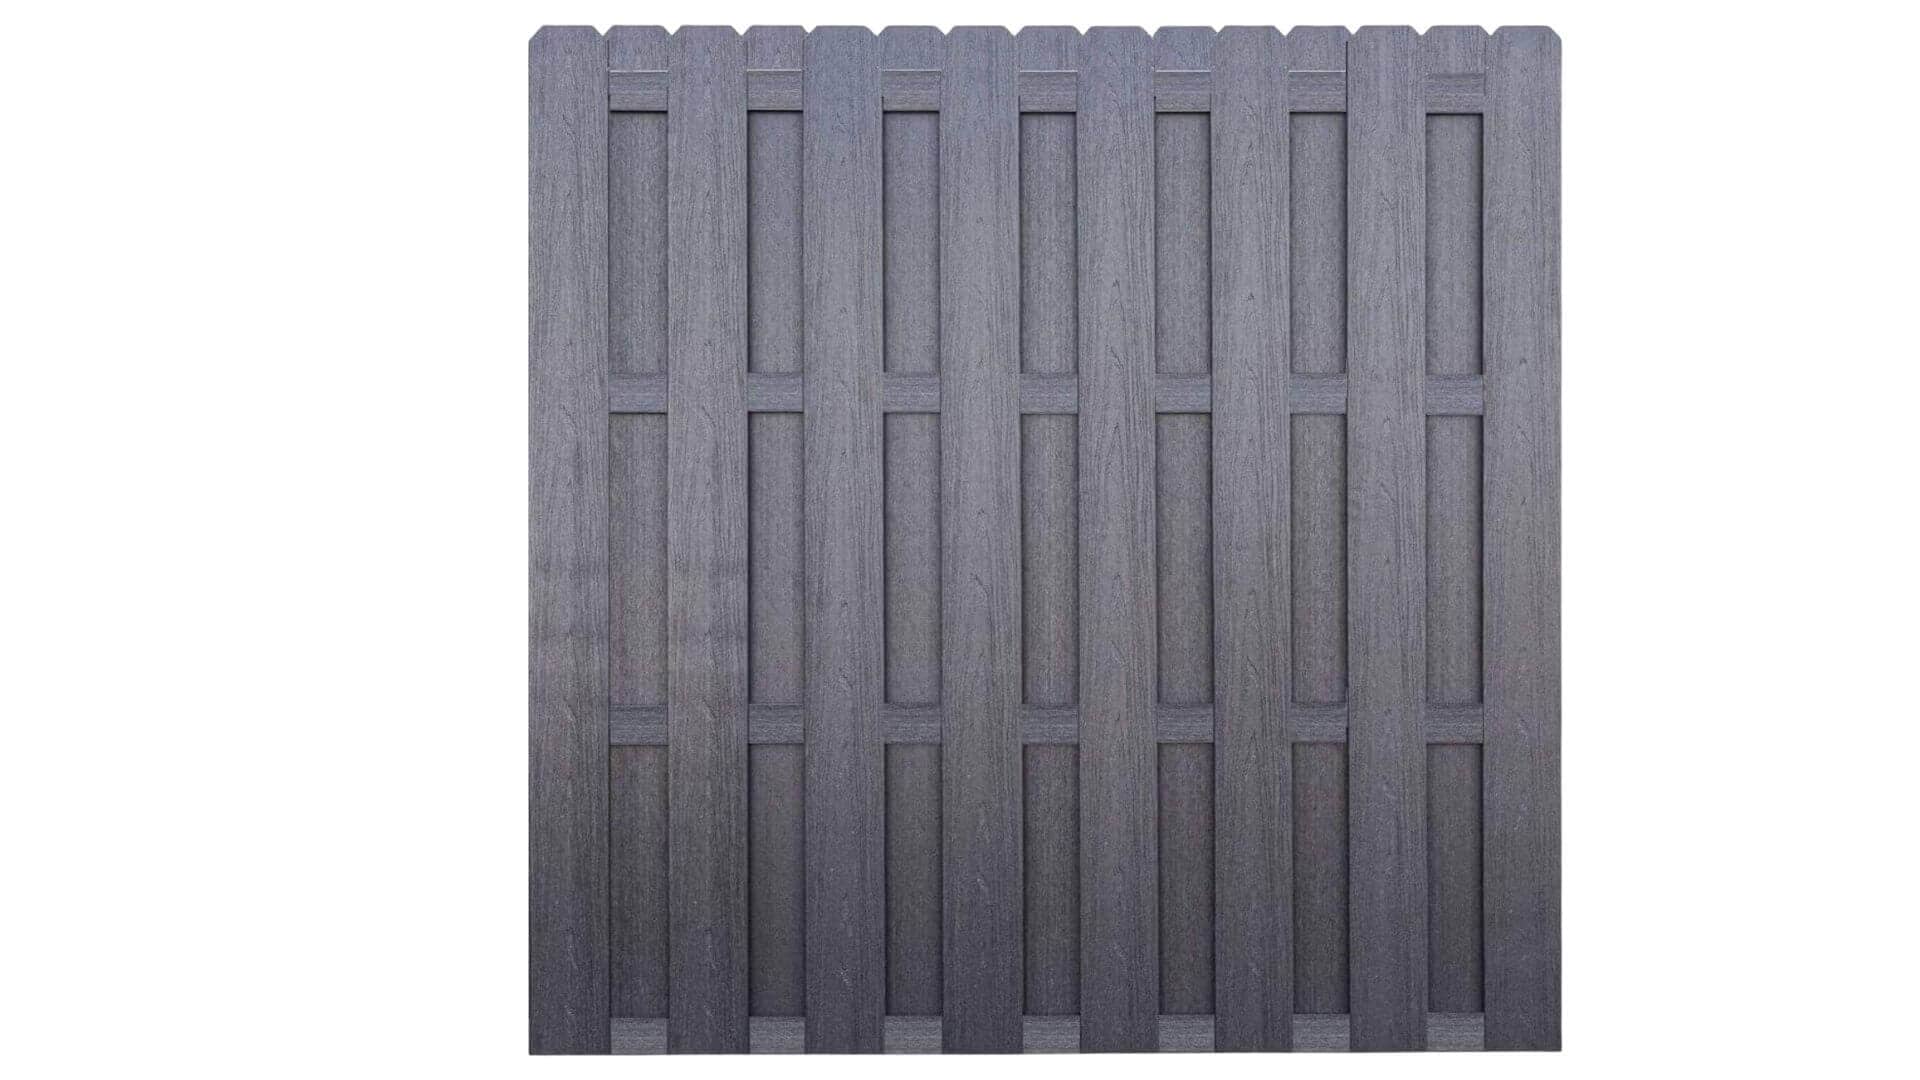 Cap Composite Pre-Assembled Fence Panels Parts Frame It All Slate Dogear Shadow box Panel 